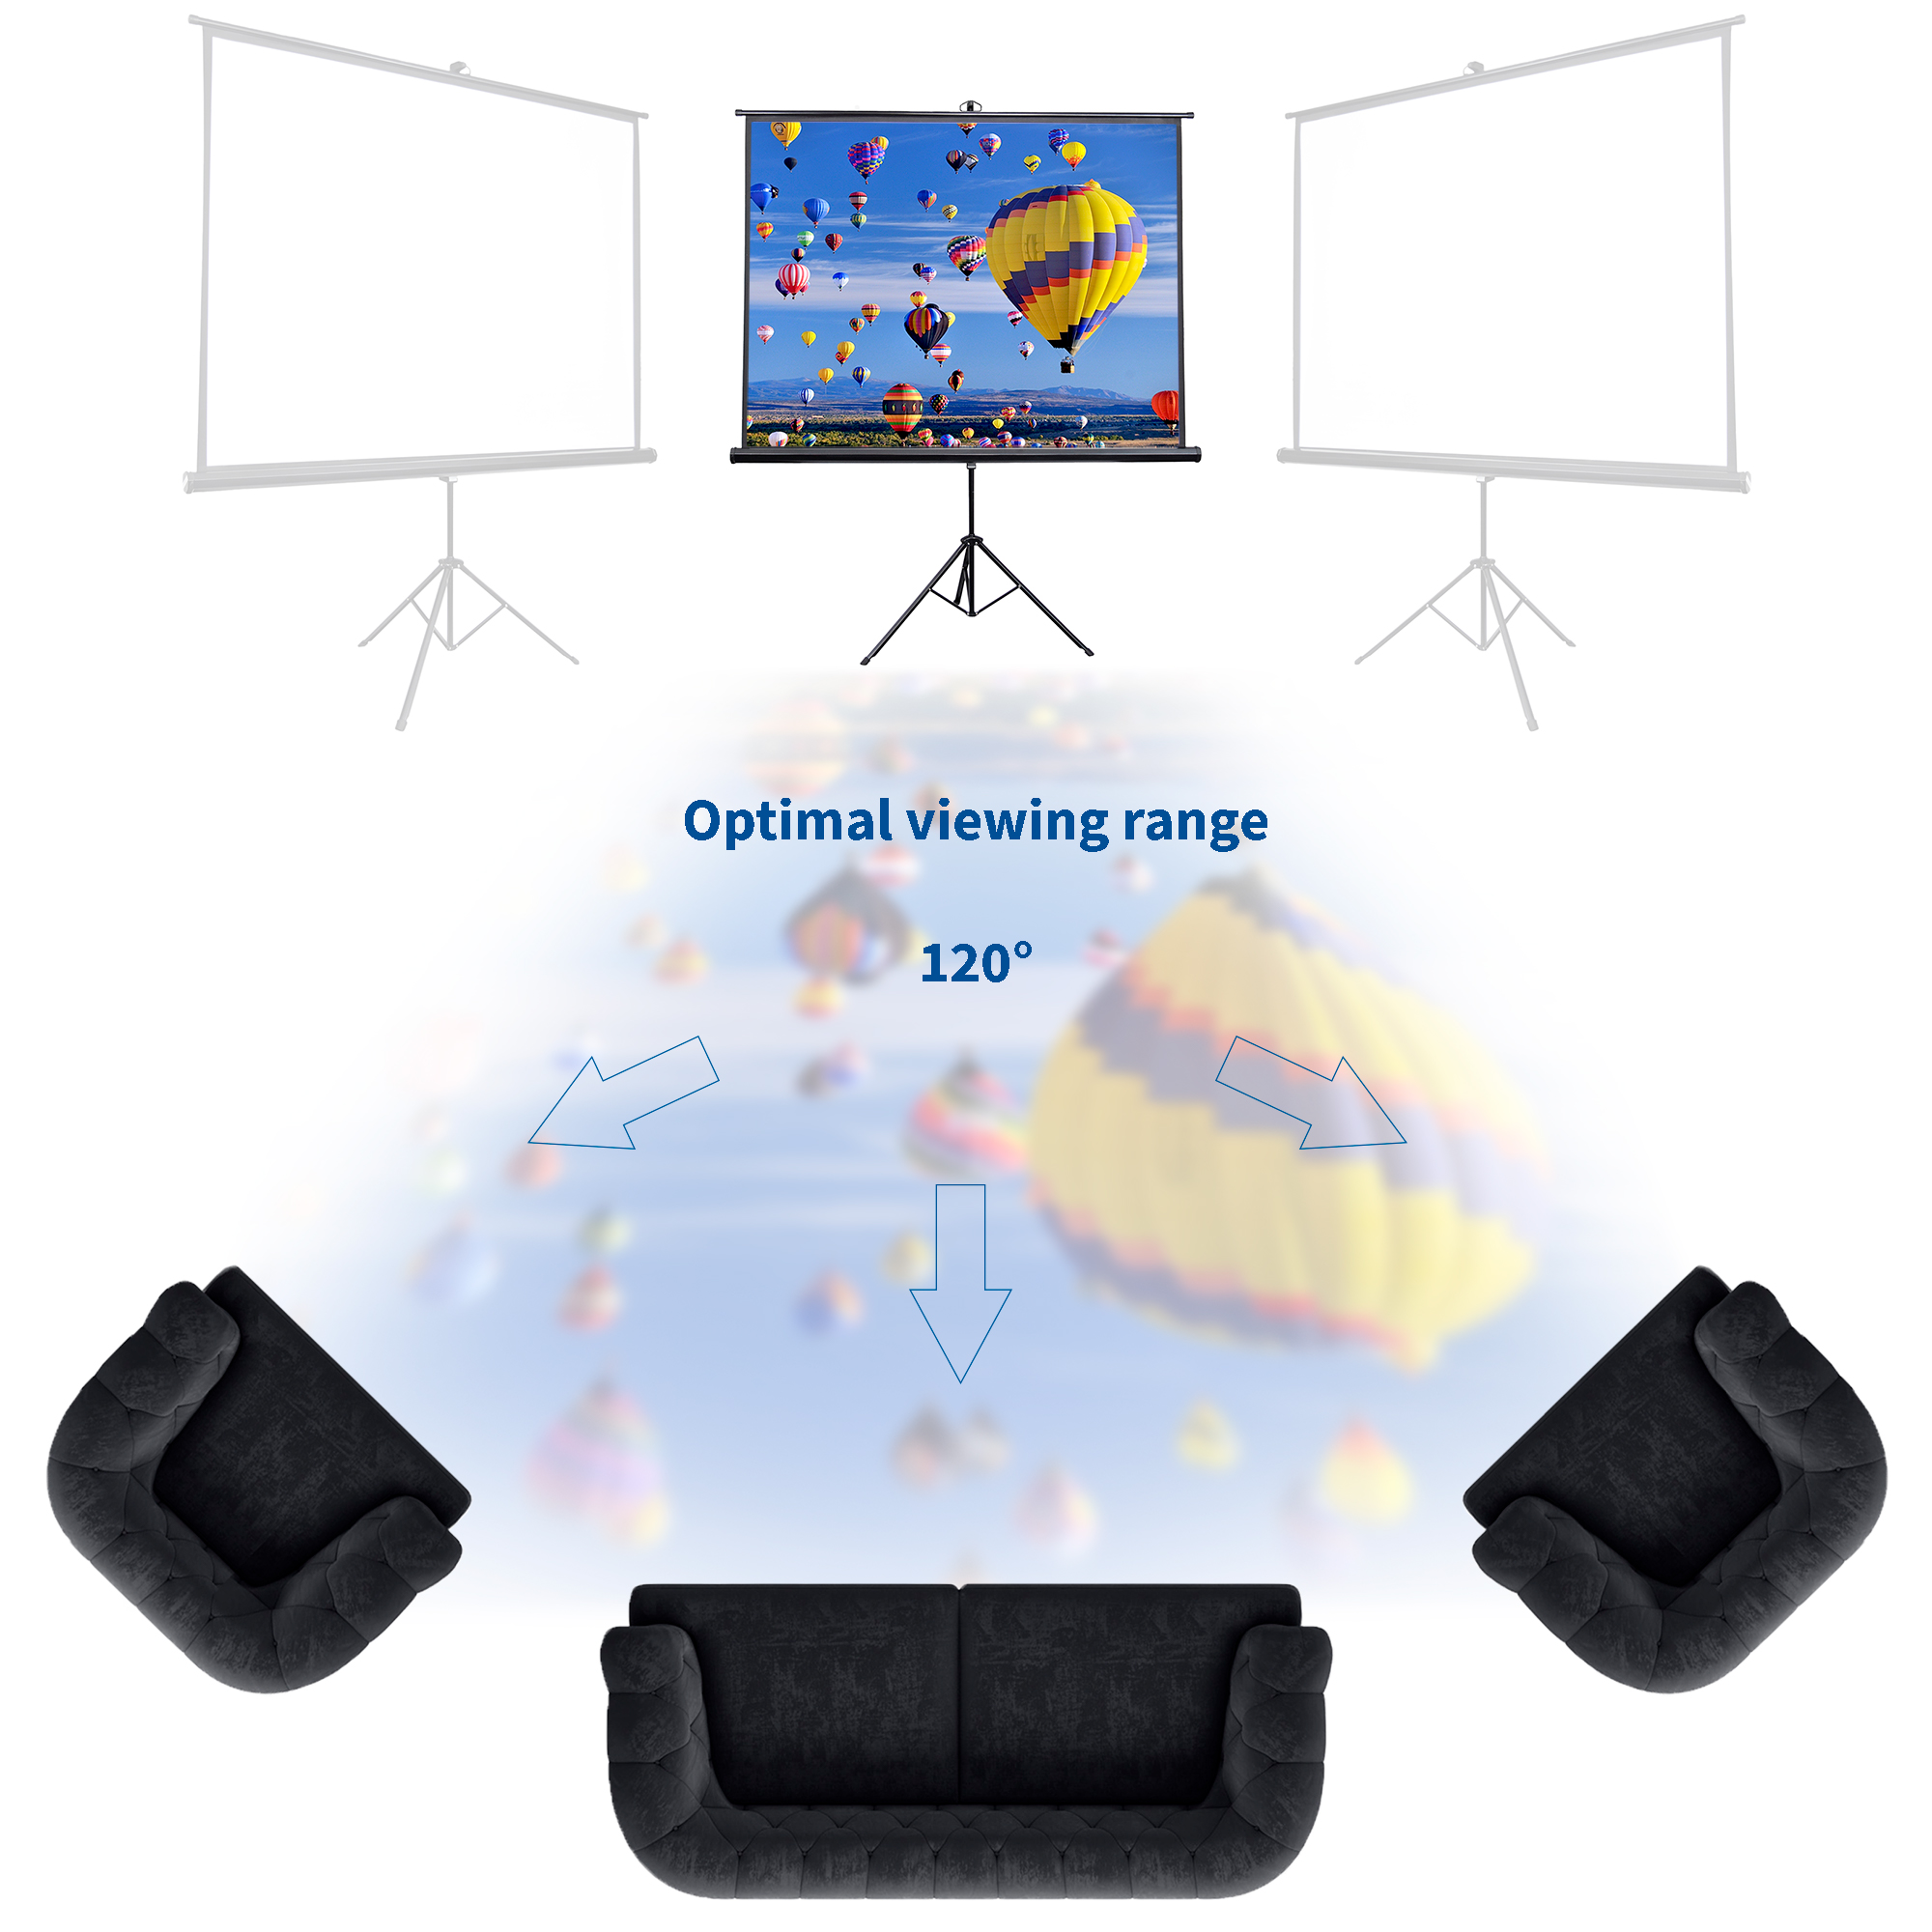 VIVO 100" Portable Projector Screen 4:3 Projection Pull Up Foldable Stand Tripod - image 3 of 6